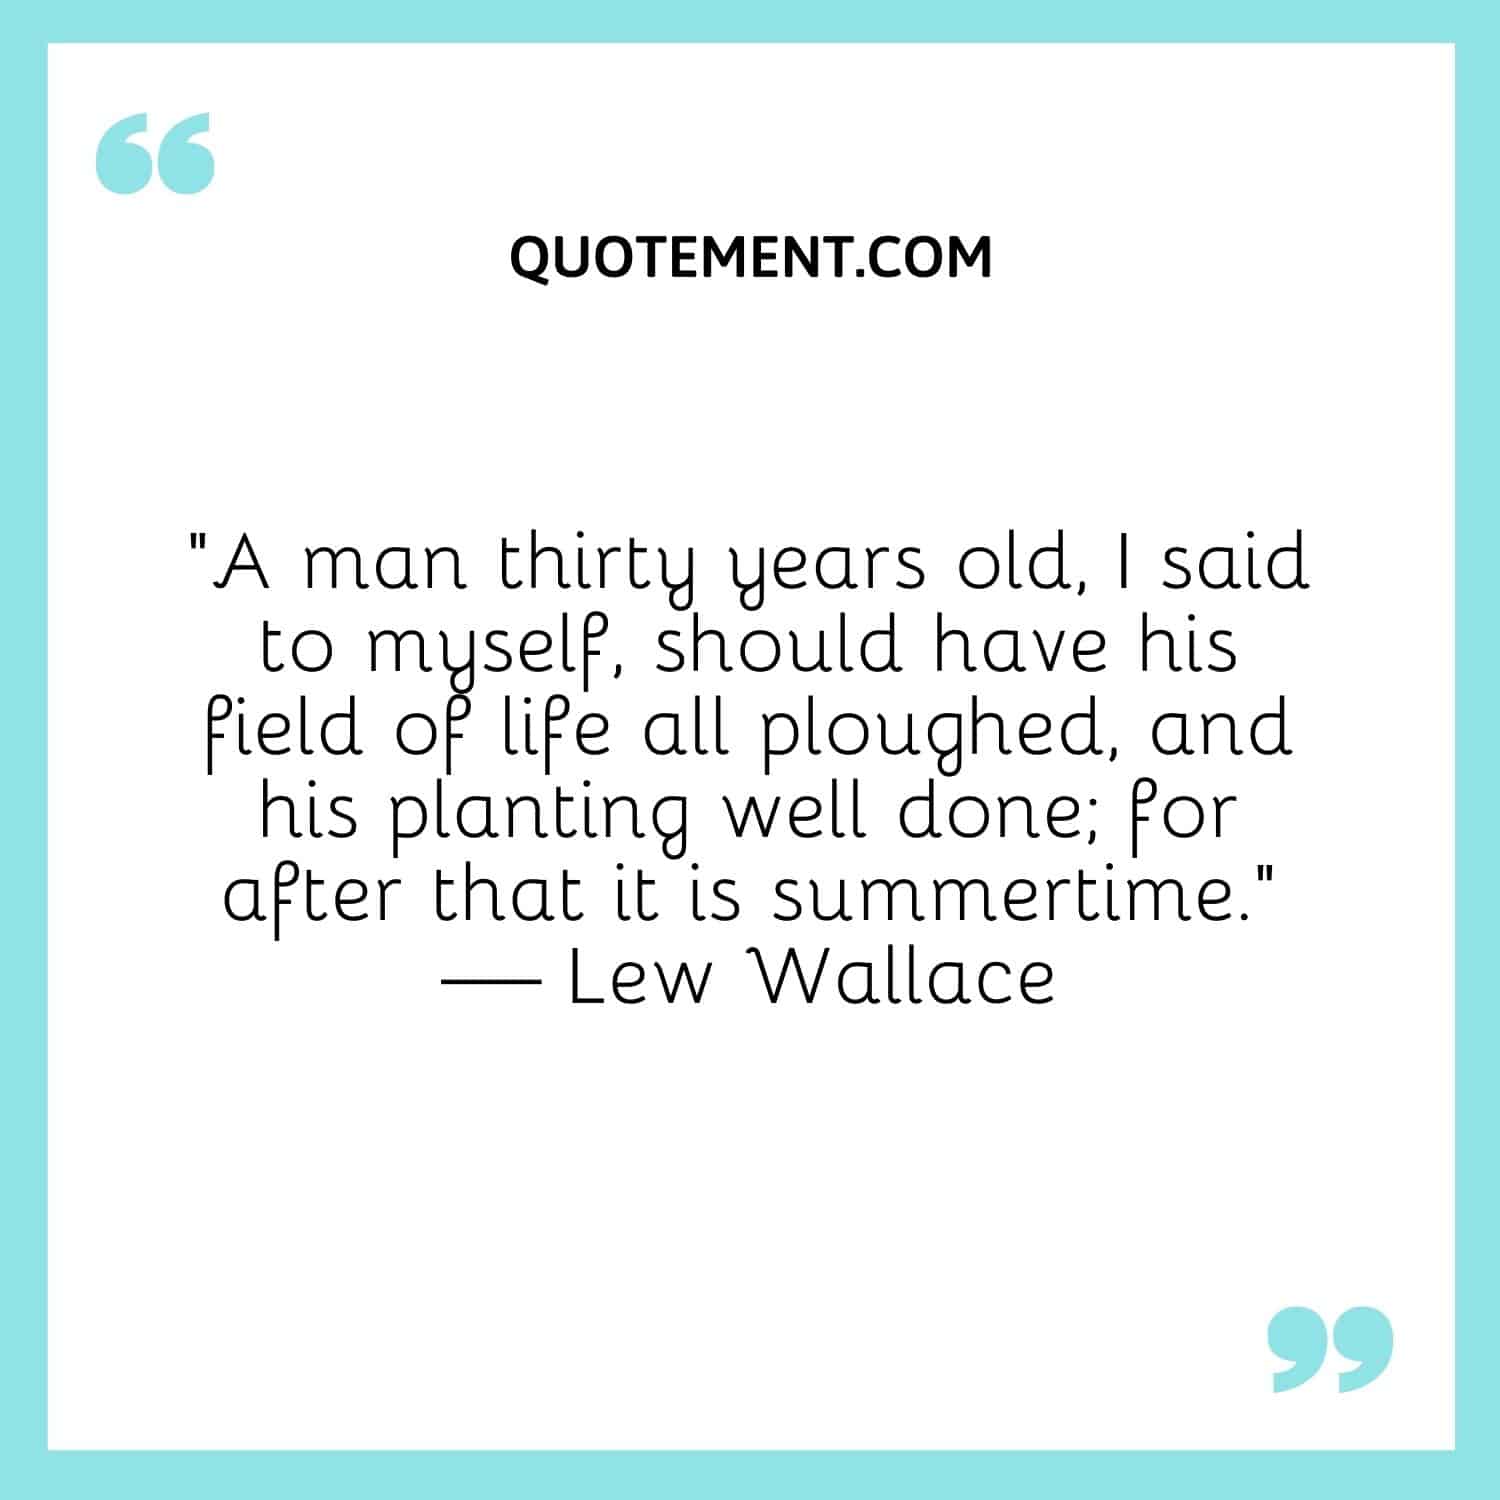 “A man thirty years old, I said to myself, should have his field of life all ploughed, and his planting well done; for after that it is summertime.” — Lew Wallace